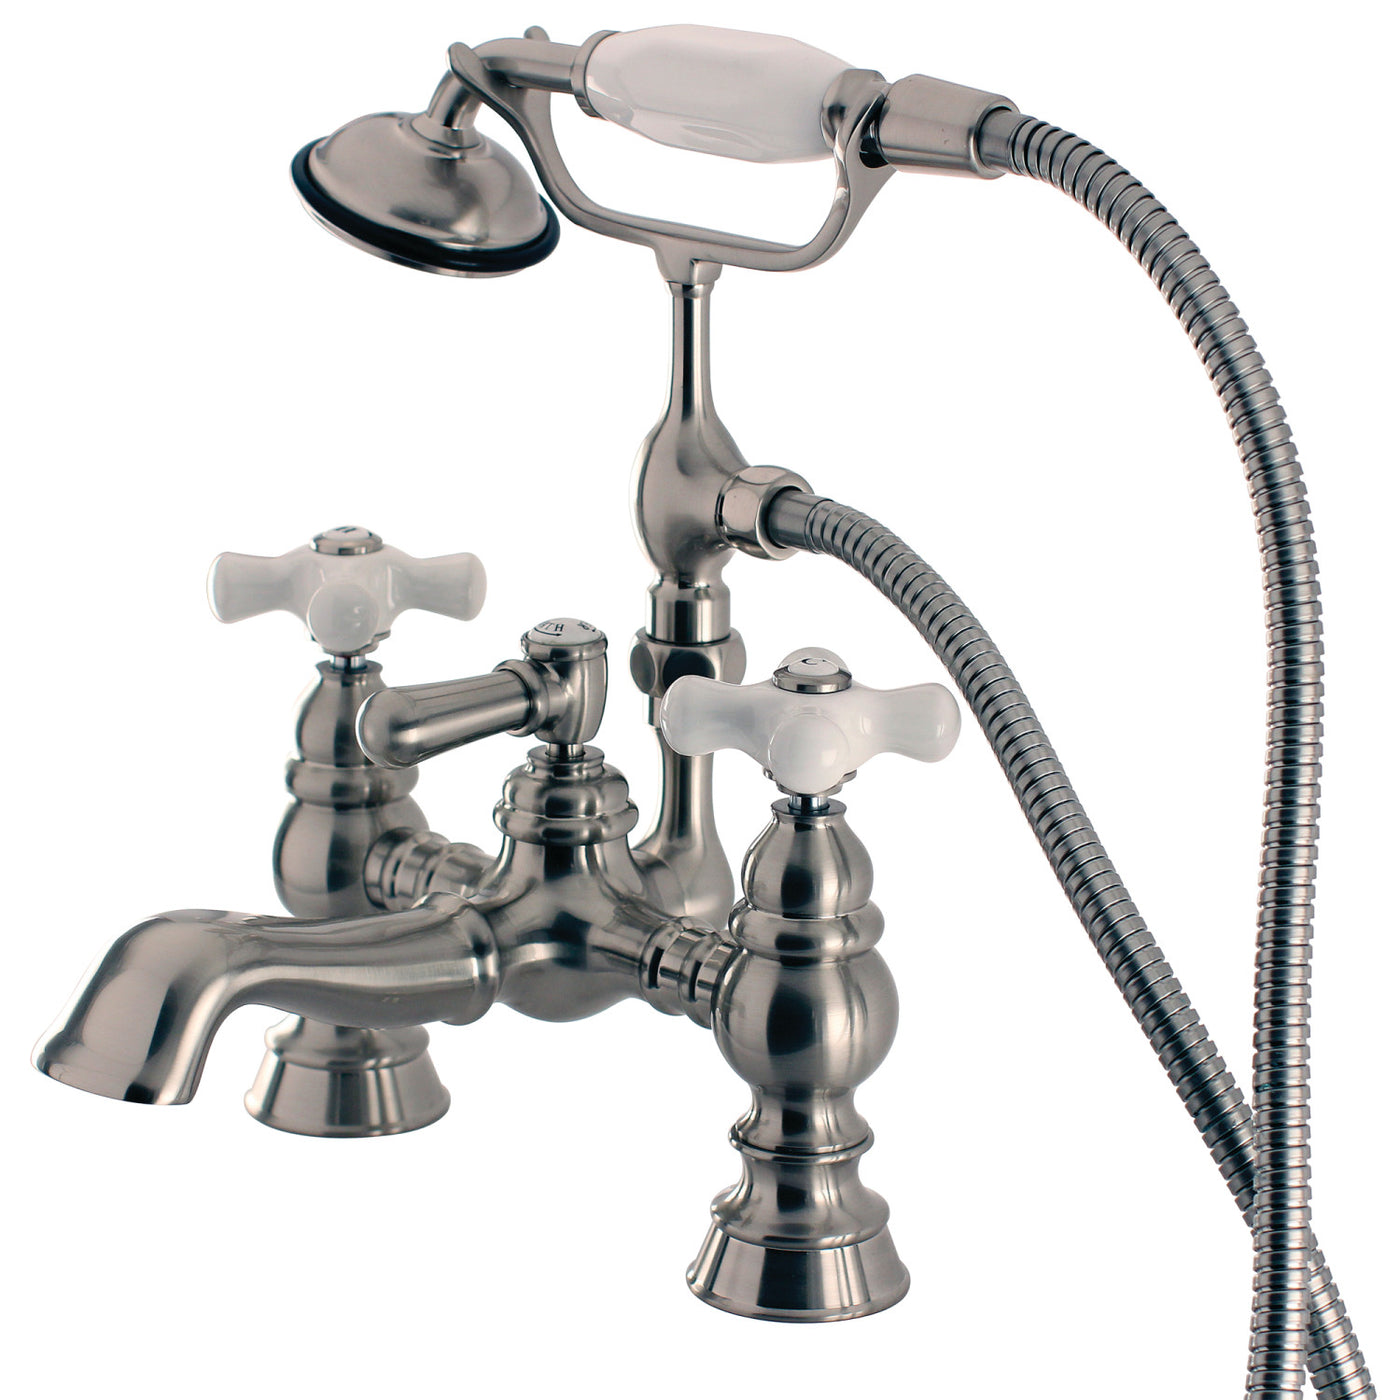 Elements of Design DT11528PX 7-Inch Deck Mount Tub Faucet with Hand Shower, Brushed Nickel